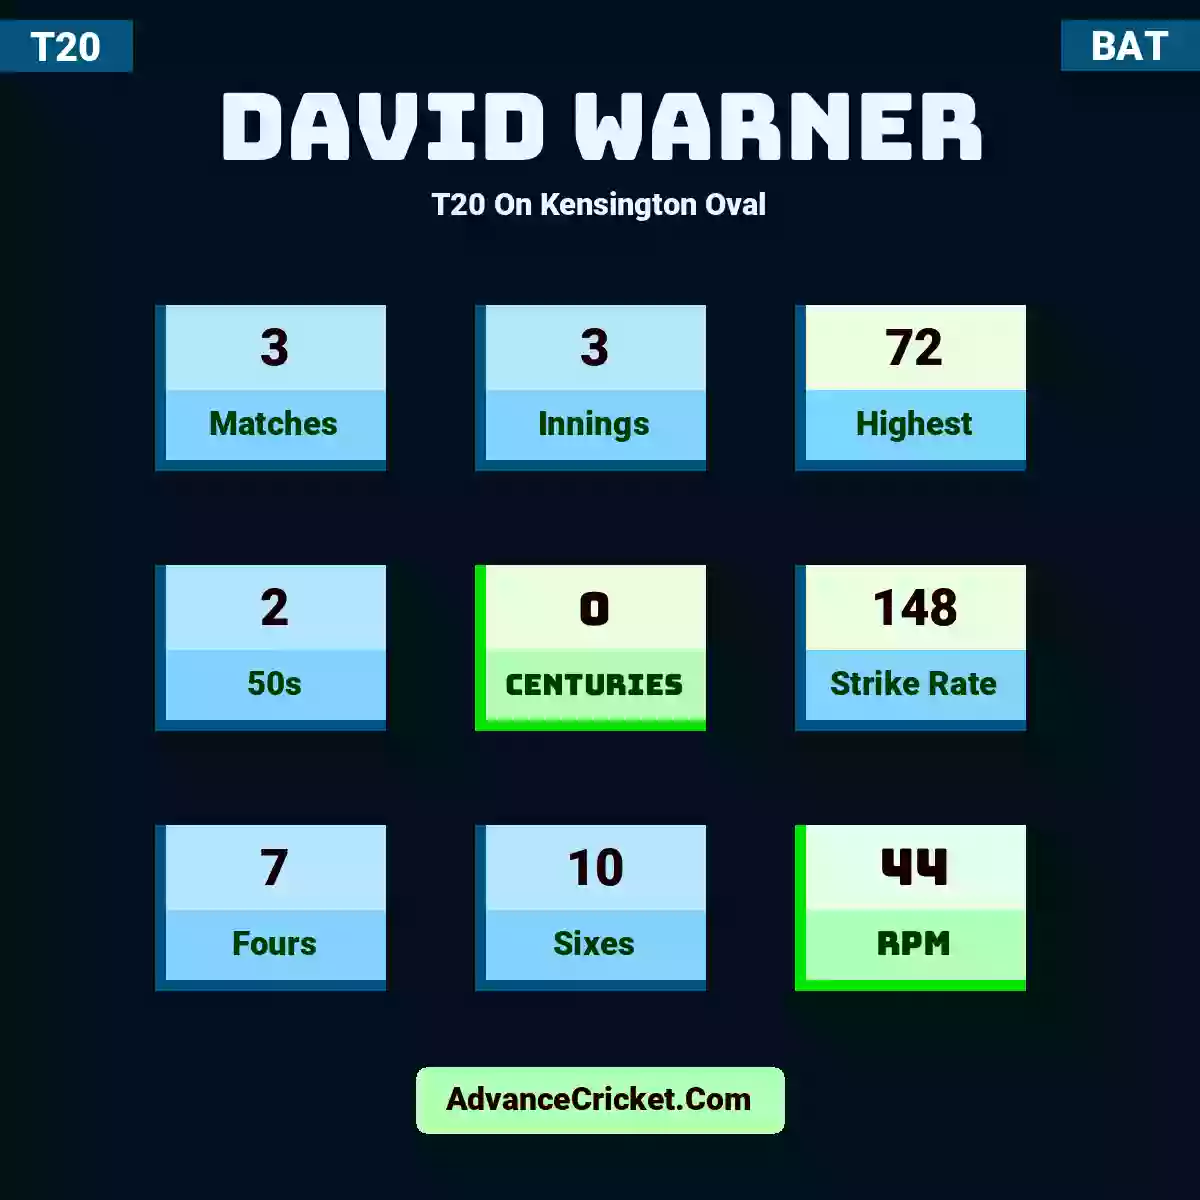 David Warner T20  On Kensington Oval, David Warner played 3 matches, scored 72 runs as highest, 2 half-centuries, and 0 centuries, with a strike rate of 148. D.Warner hit 7 fours and 10 sixes, with an RPM of 44.